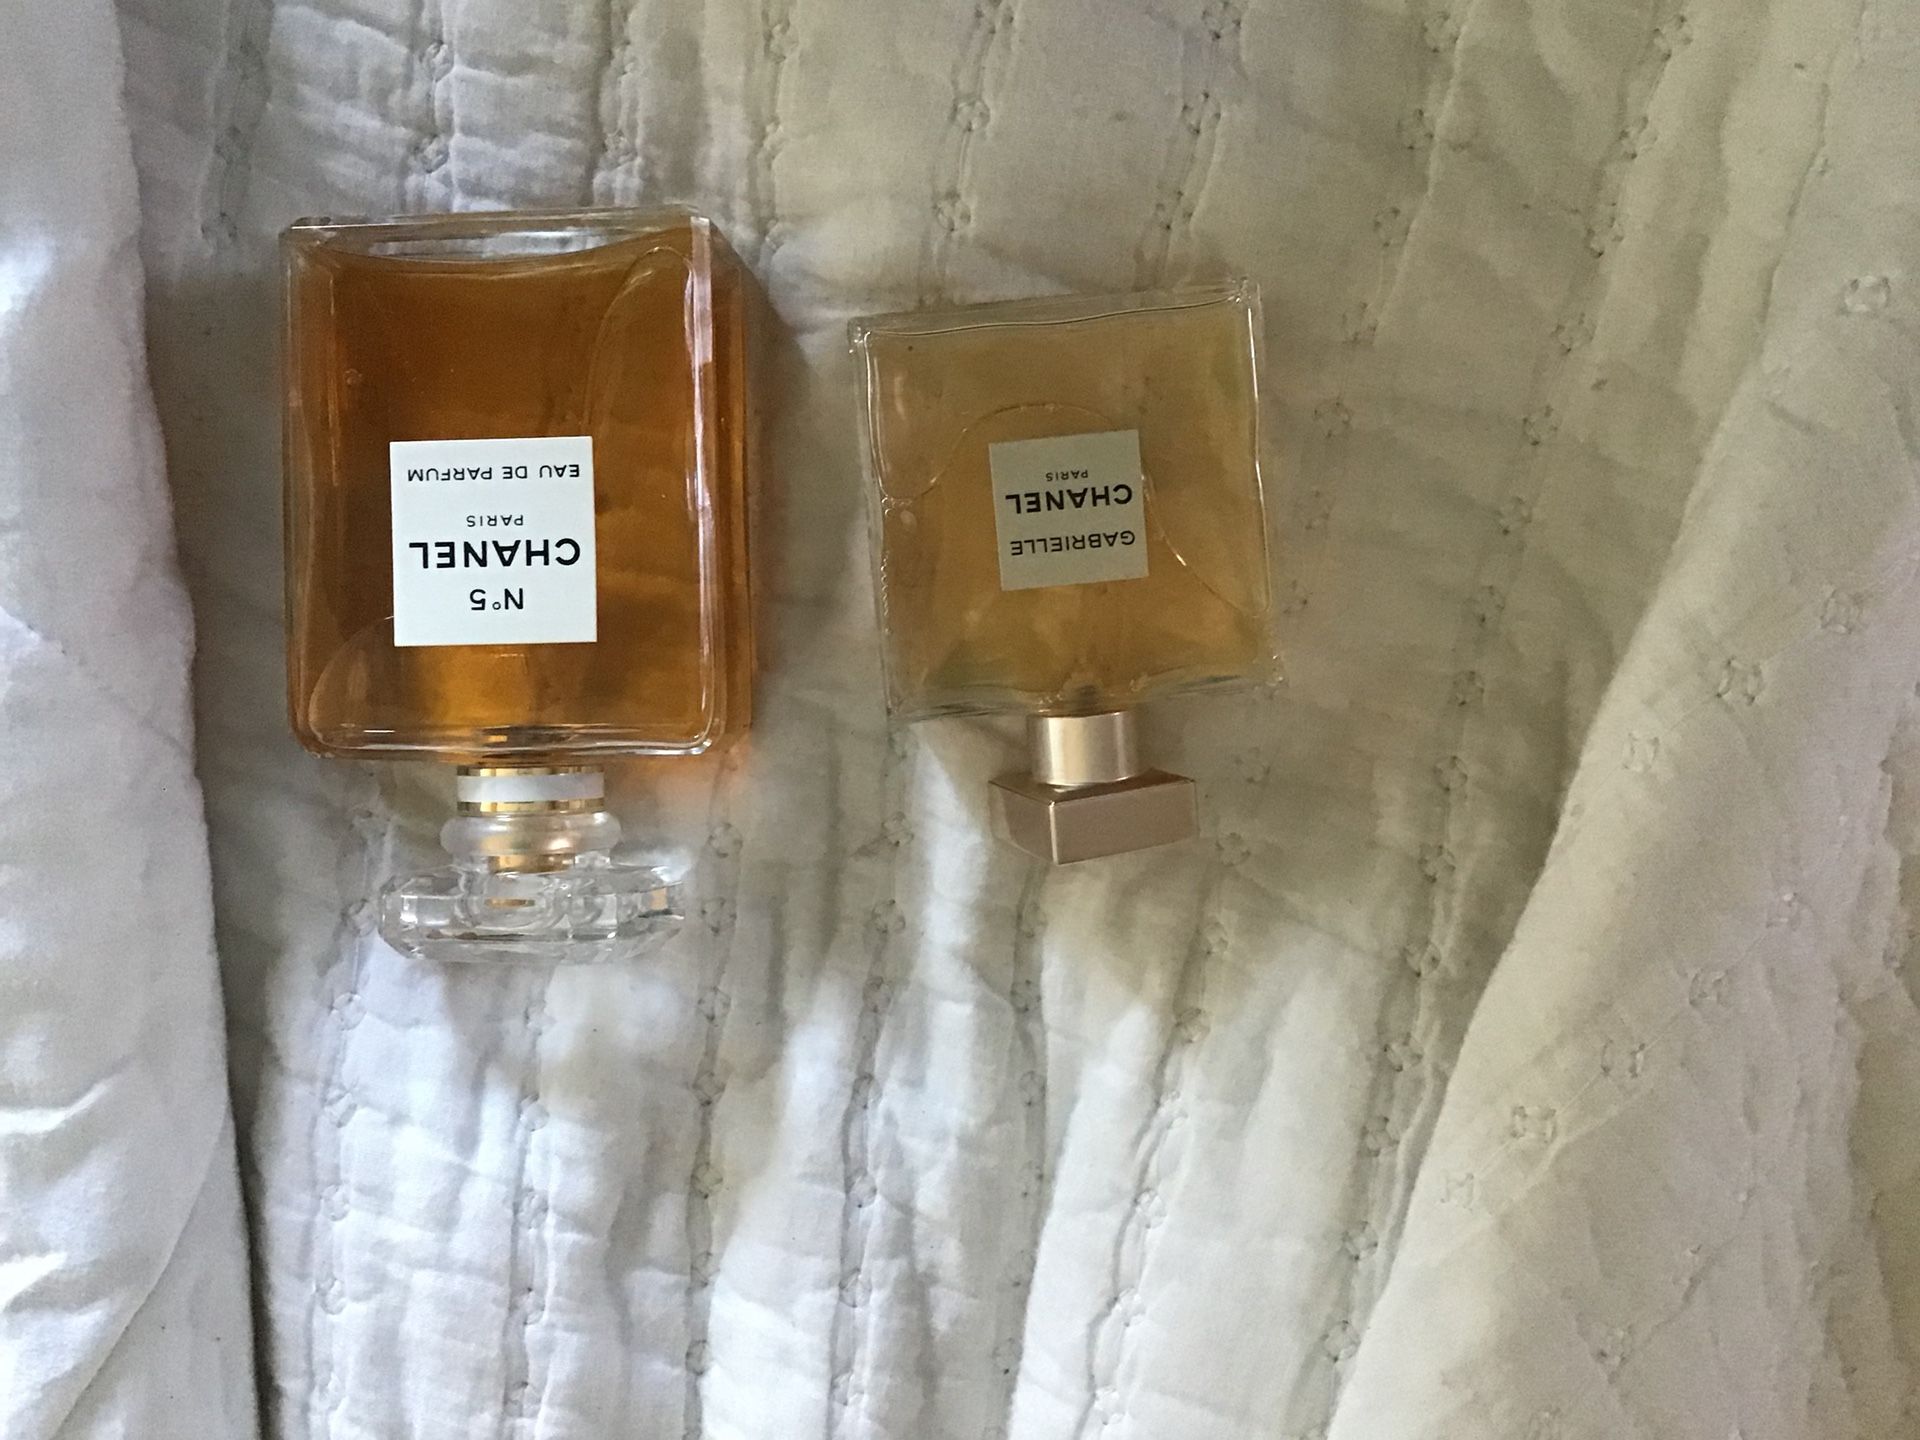 #5 and Gabrielle CHANEL perfume never used. $40 for Gabrielle $50 for N5 unless you get them both $85